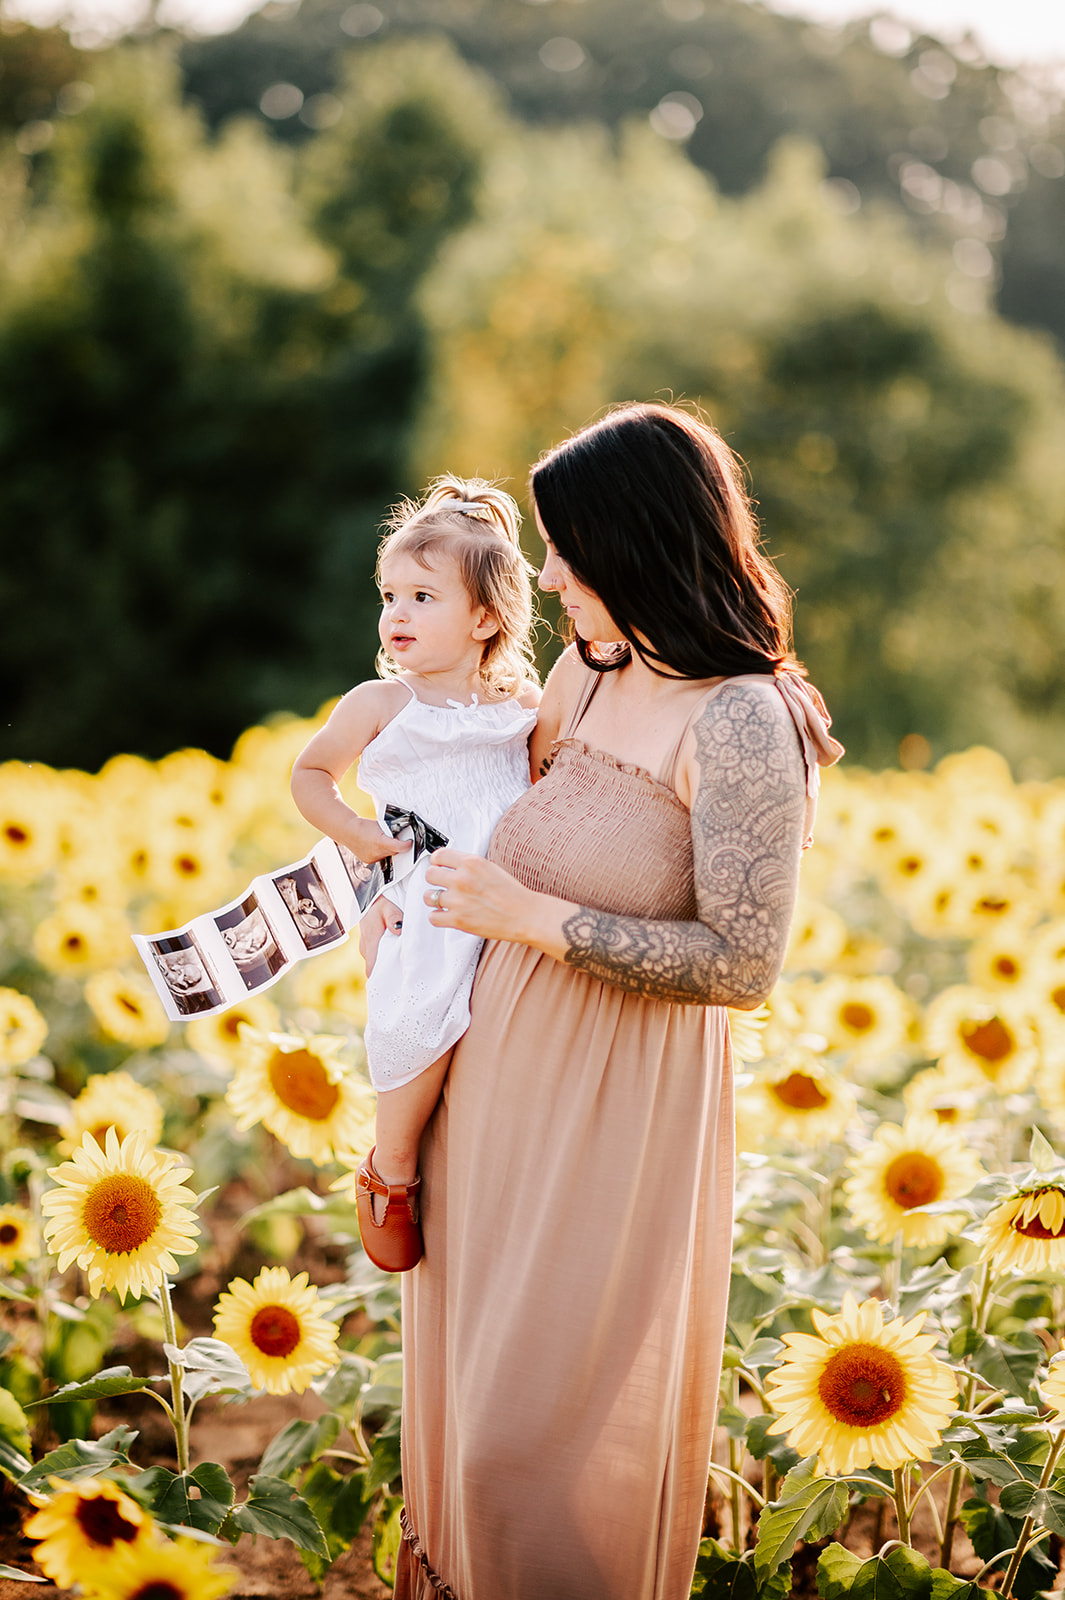 A mom in a beige maternity gown stands in a field of sunflowers with her toddler on her hip in a white dress holding a string of sonograms during Asheville Fall Activities